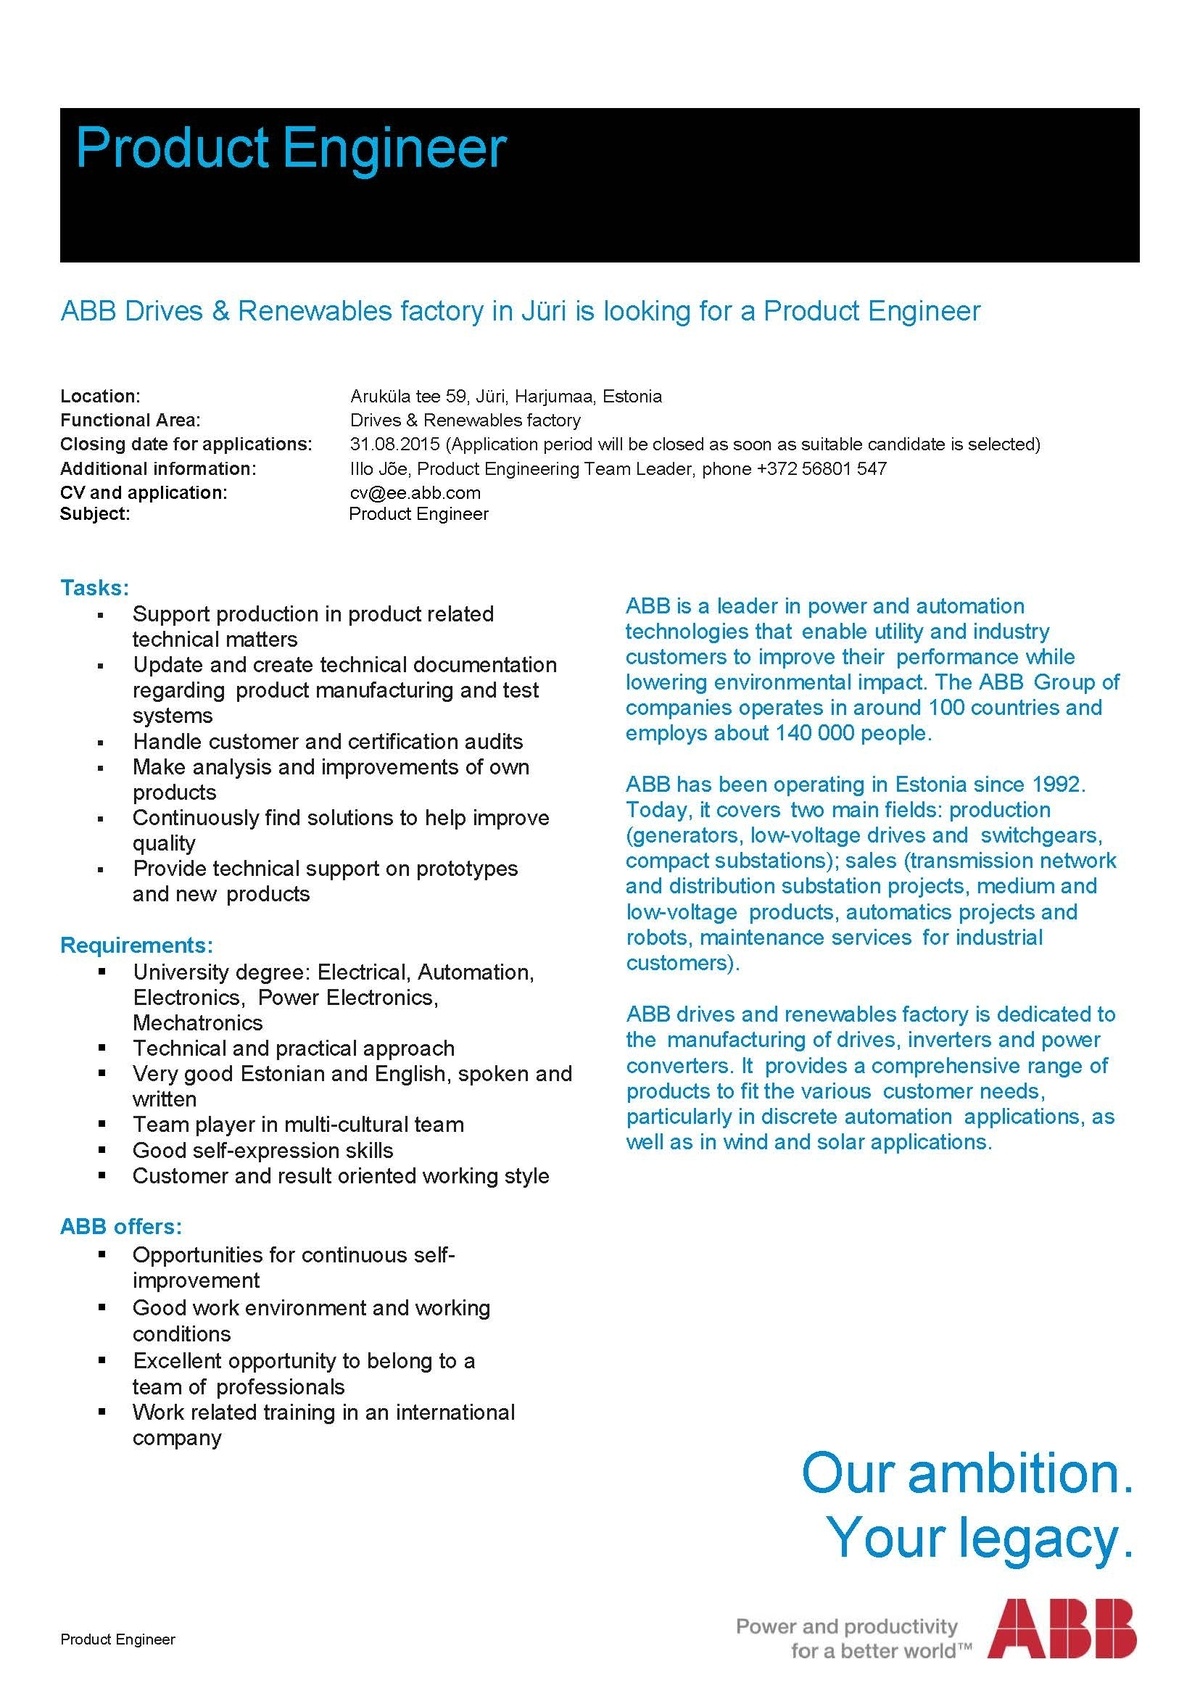 ABB AS Product Engineer